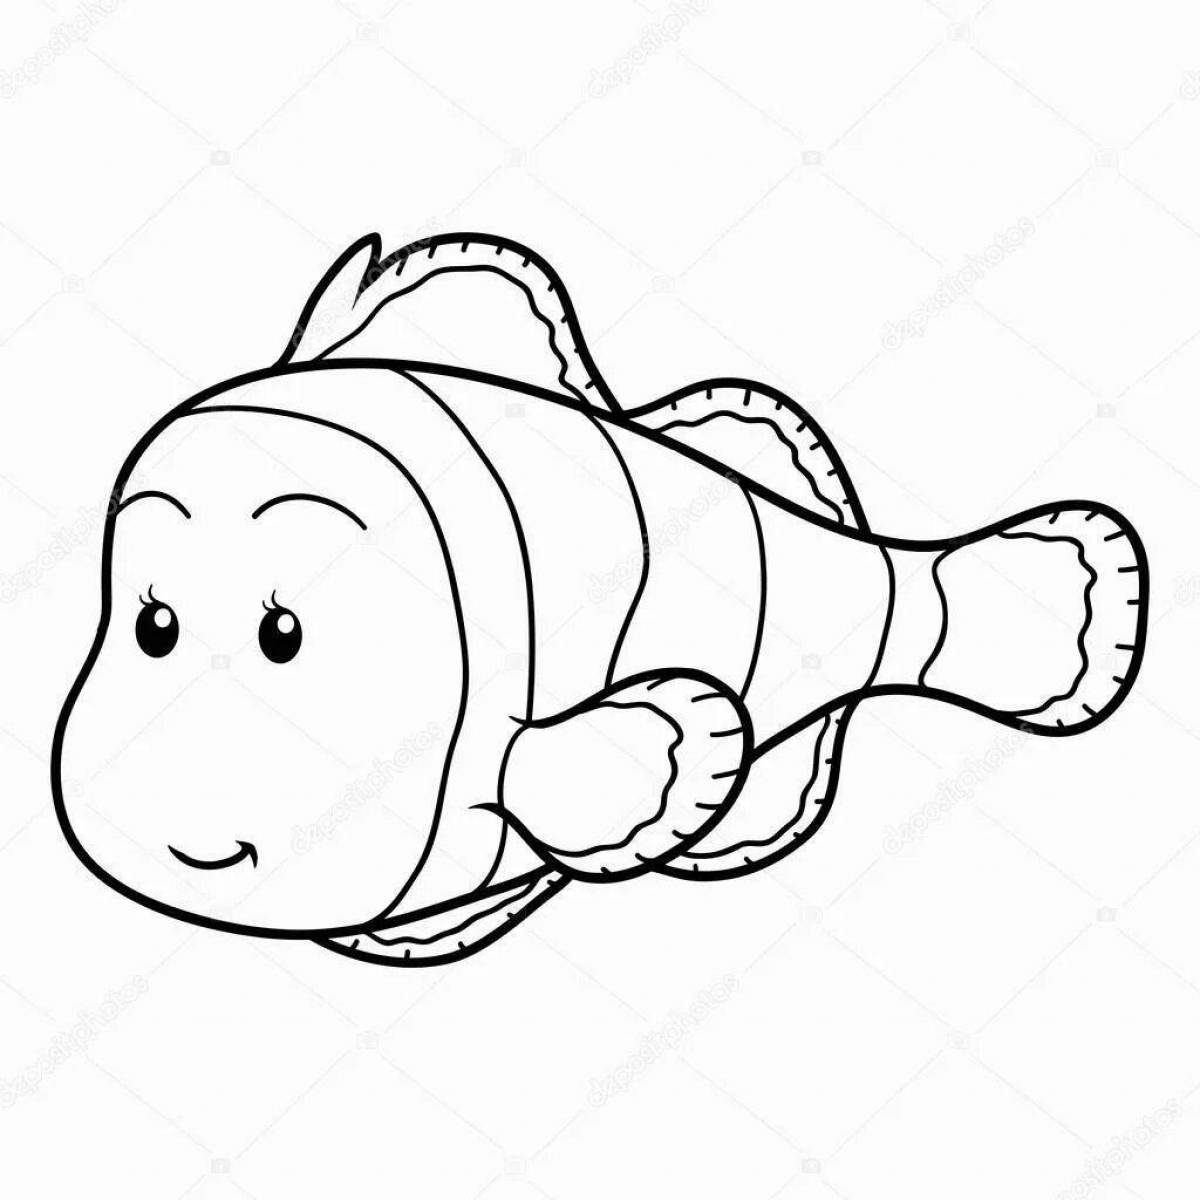 Bright clownfish coloring page